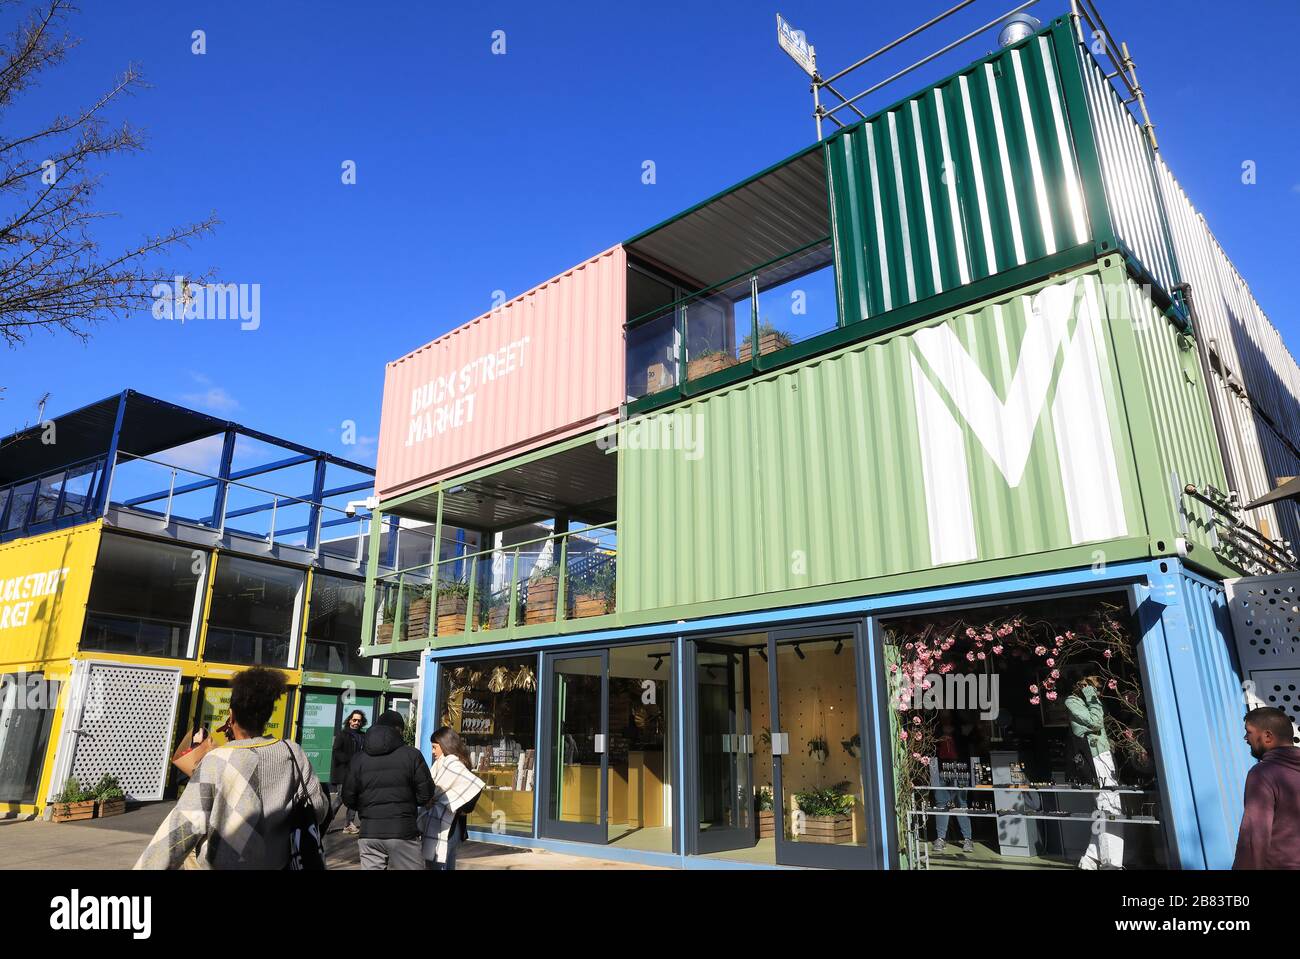 Buck Street Market, Camden's new trendy recycled shipping-container market, in north London, UK Stock Photo